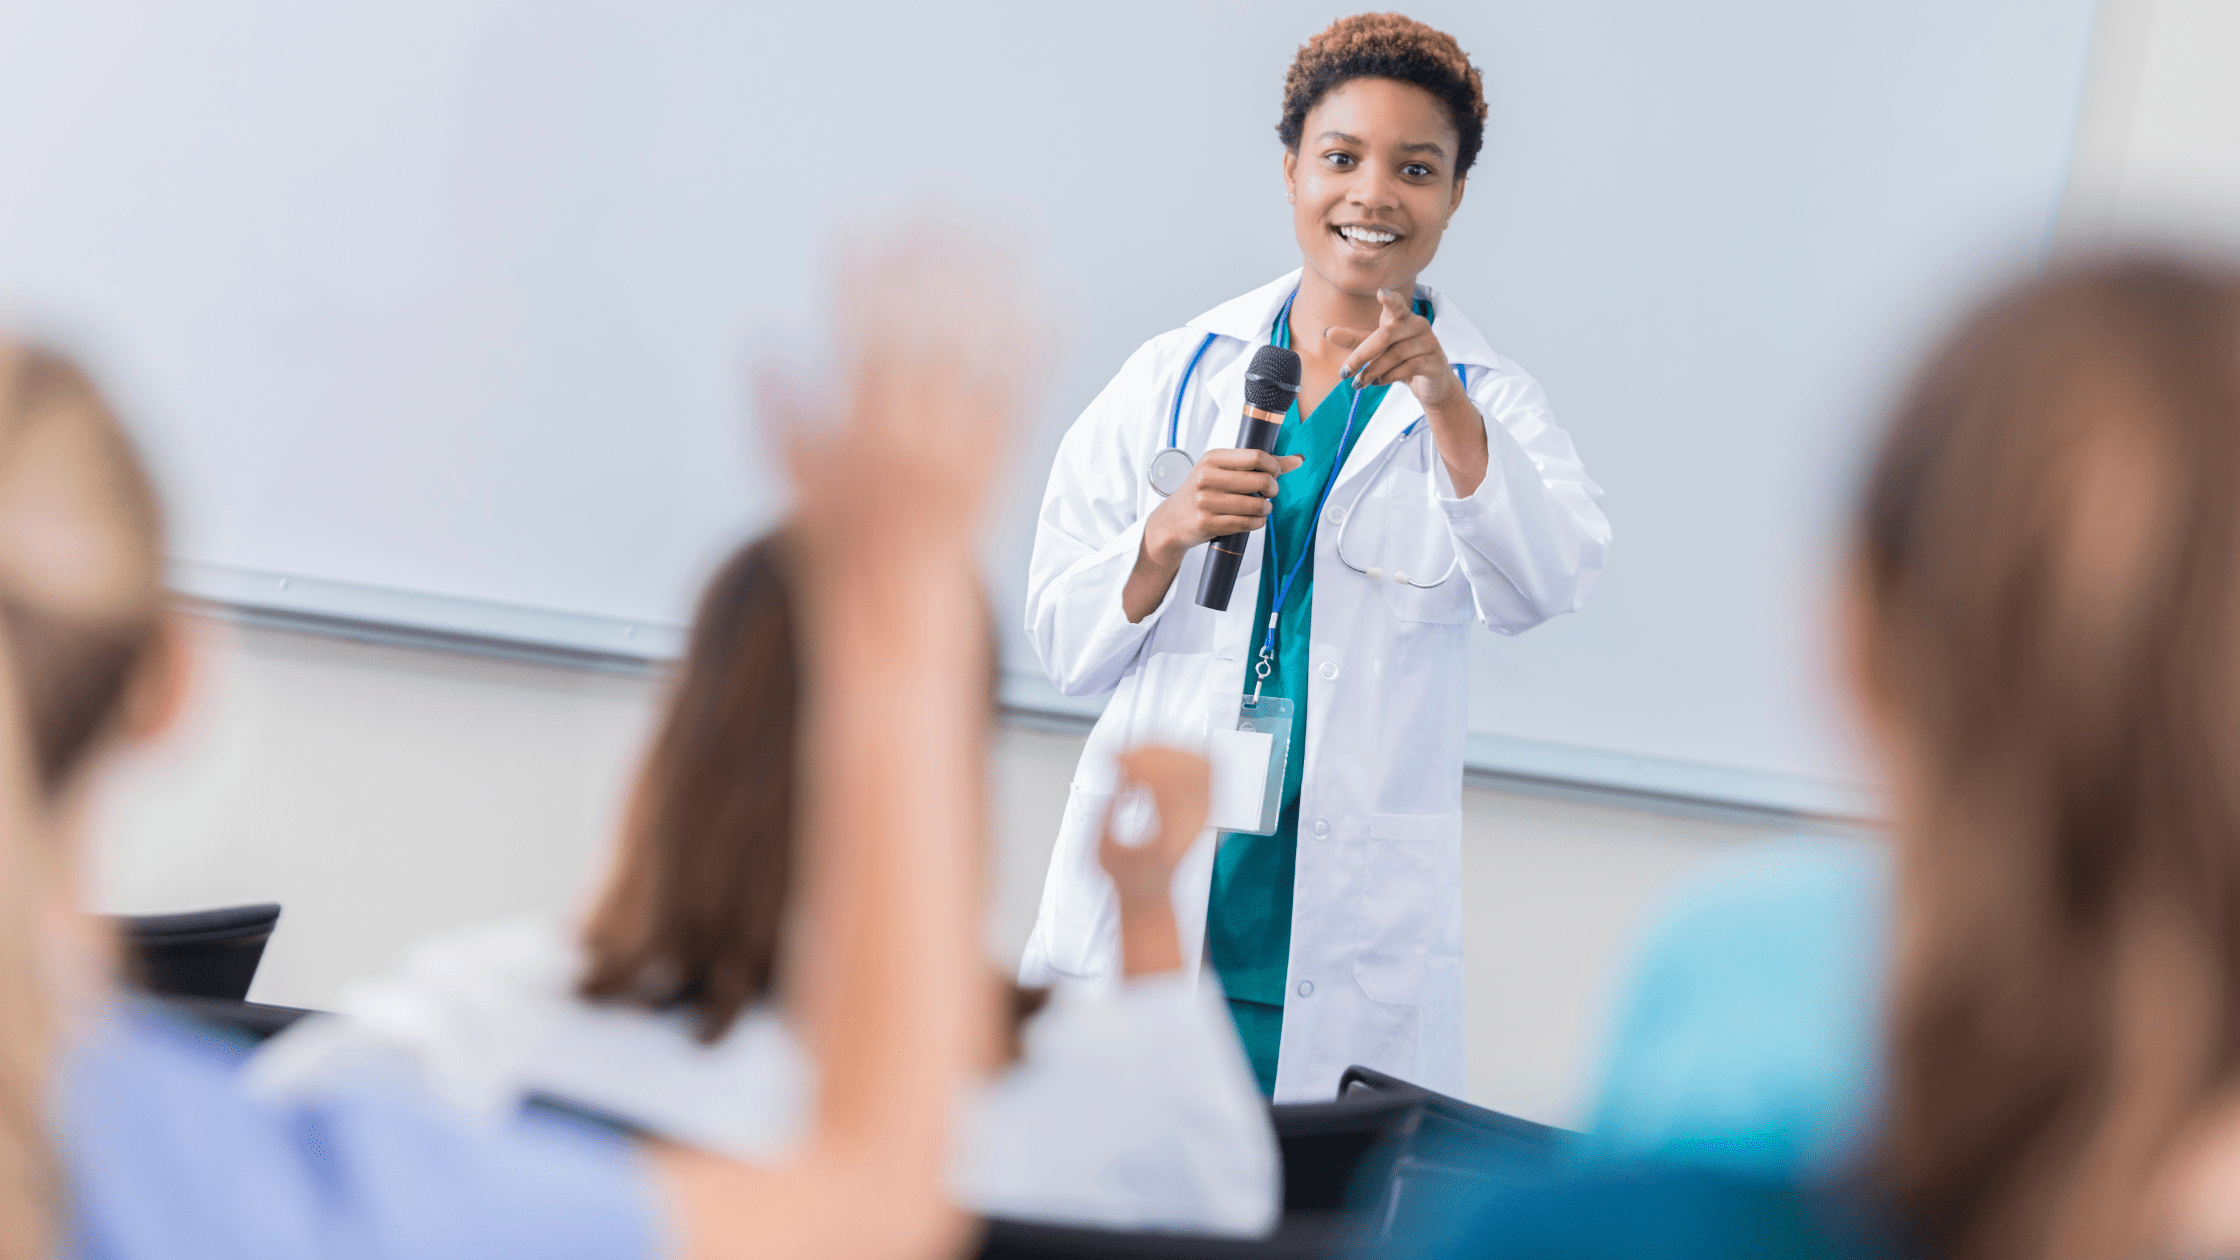 A doctor wearing scrubs answering questions in a medical school classroom.